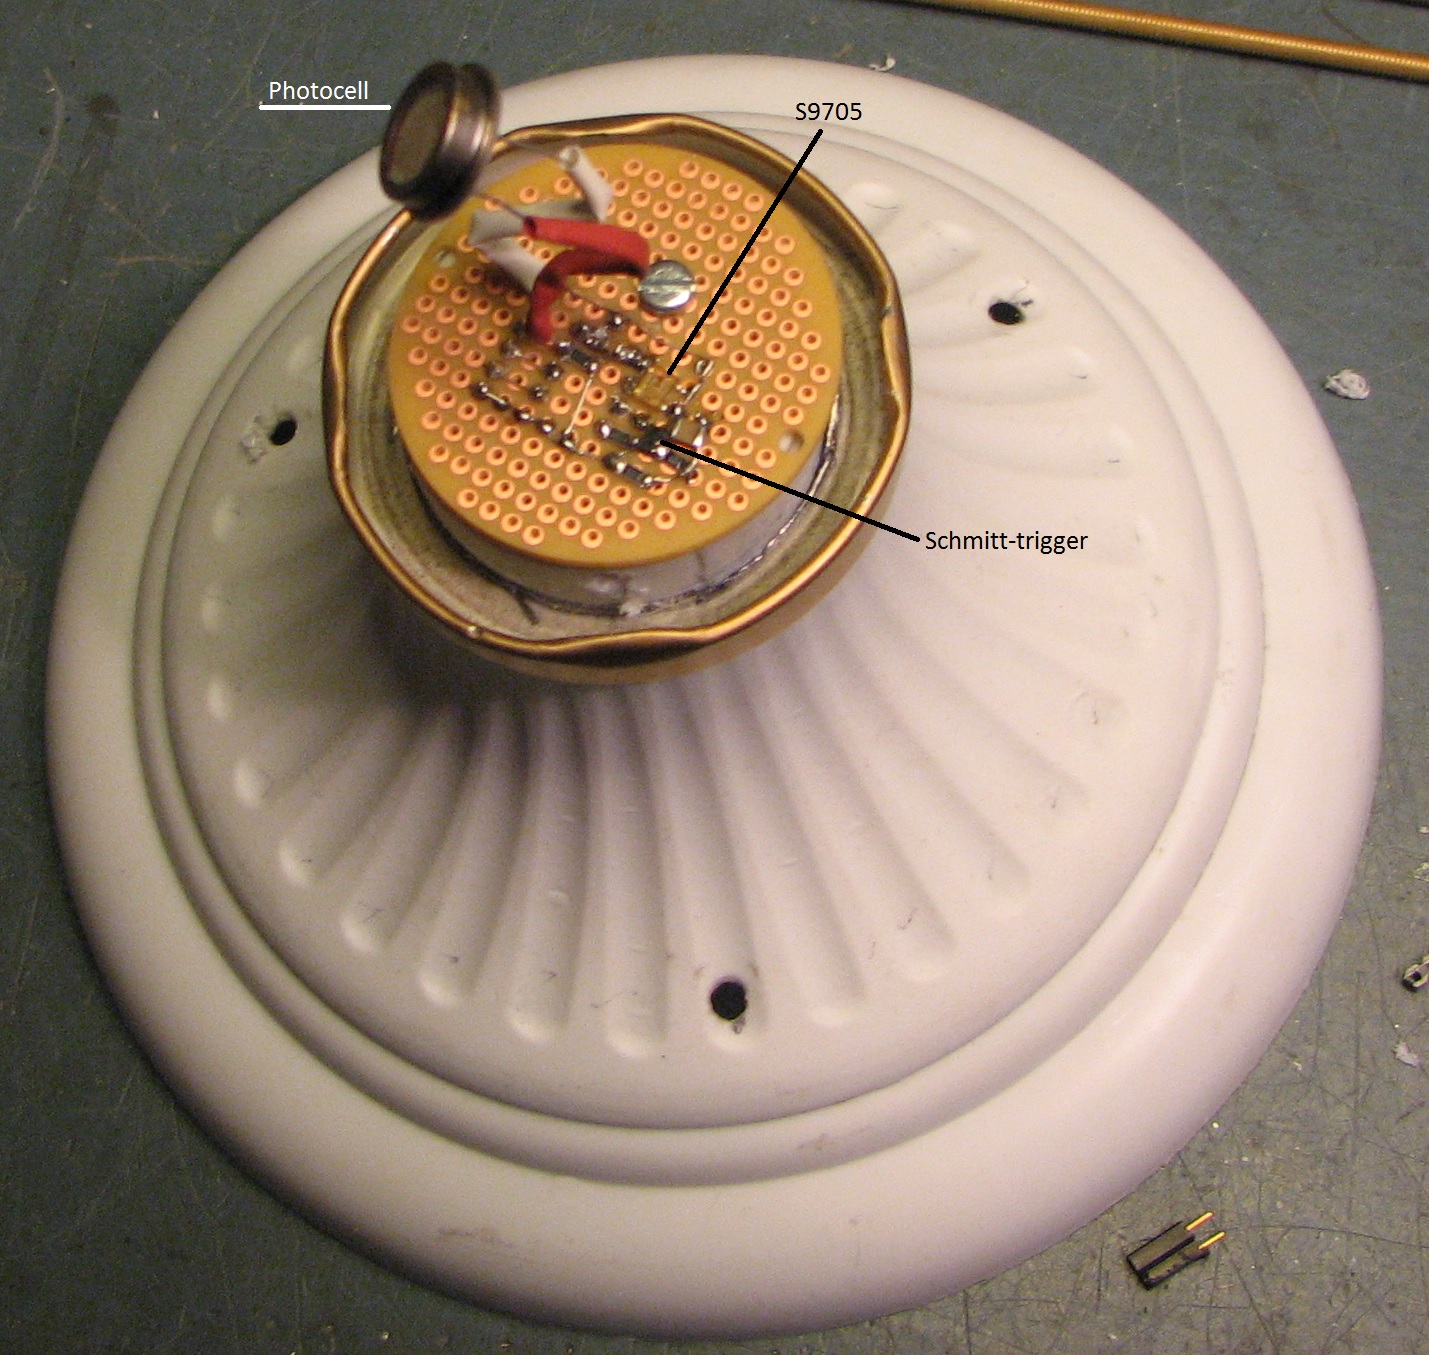 Top disc, shows perfboard with light sensor electronics